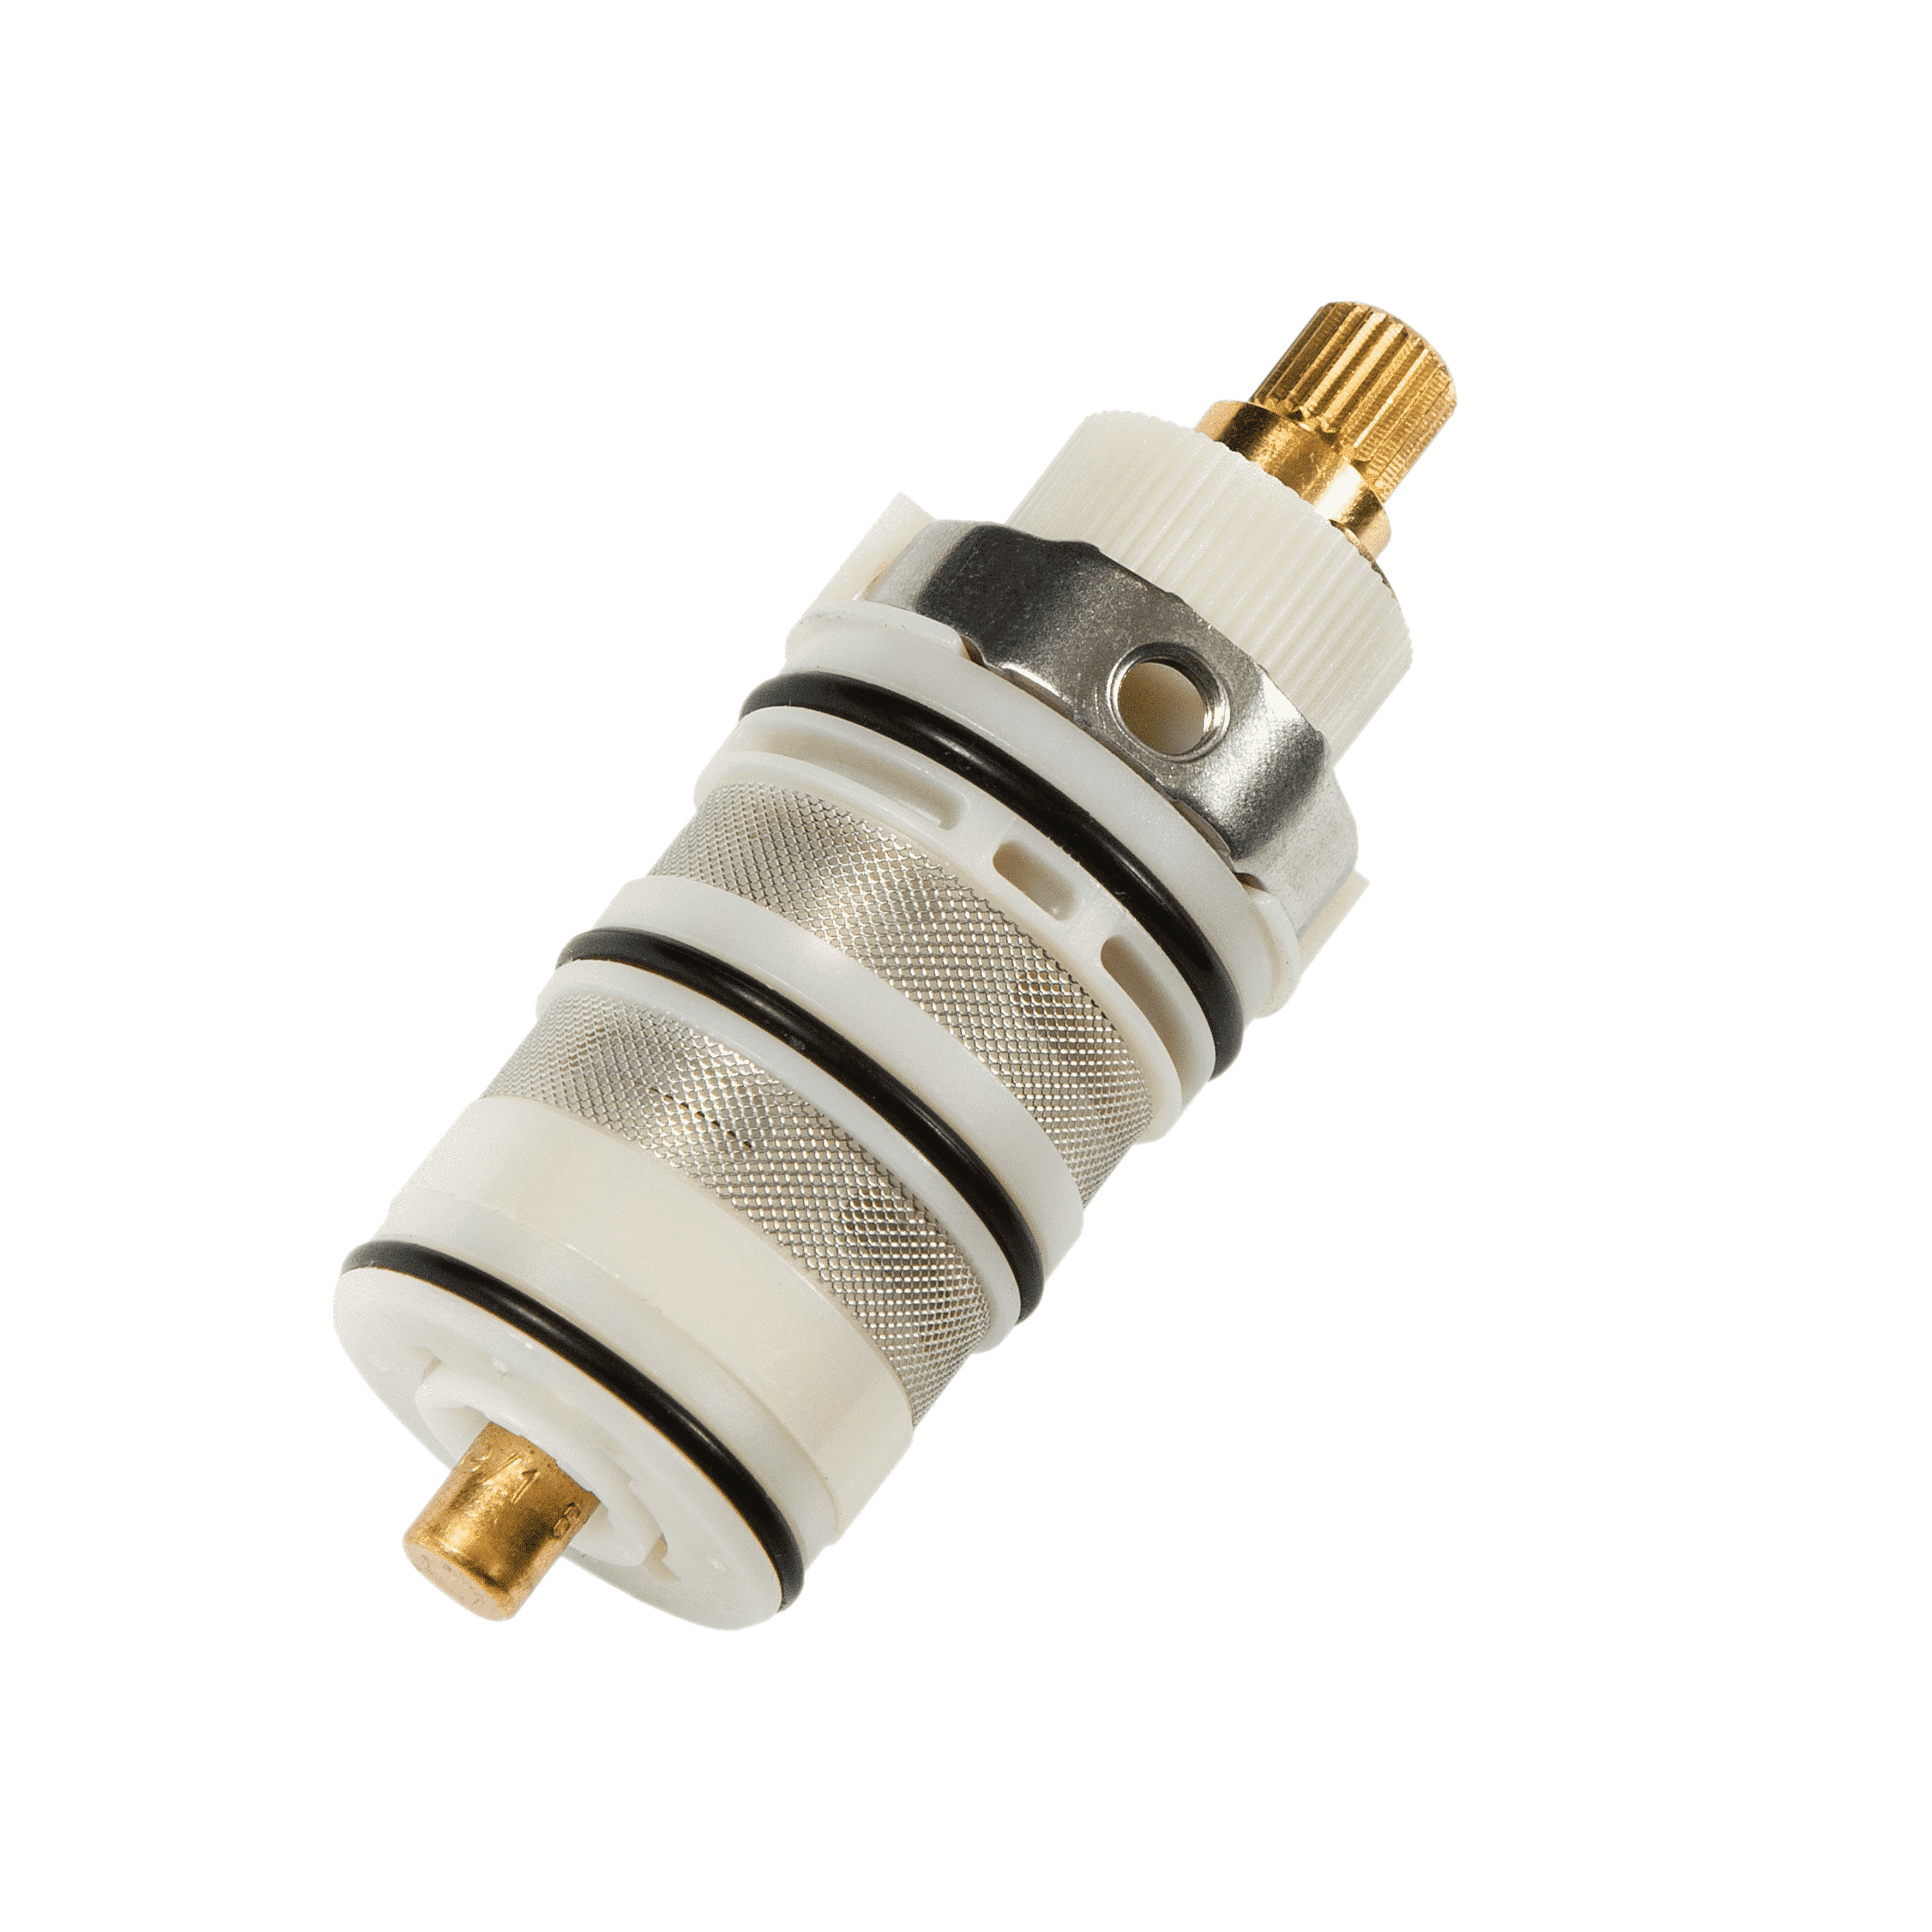 Vernet thermostatic cartridges ensure a precise and stable mixed water temperature thanks to their dual flow control function.